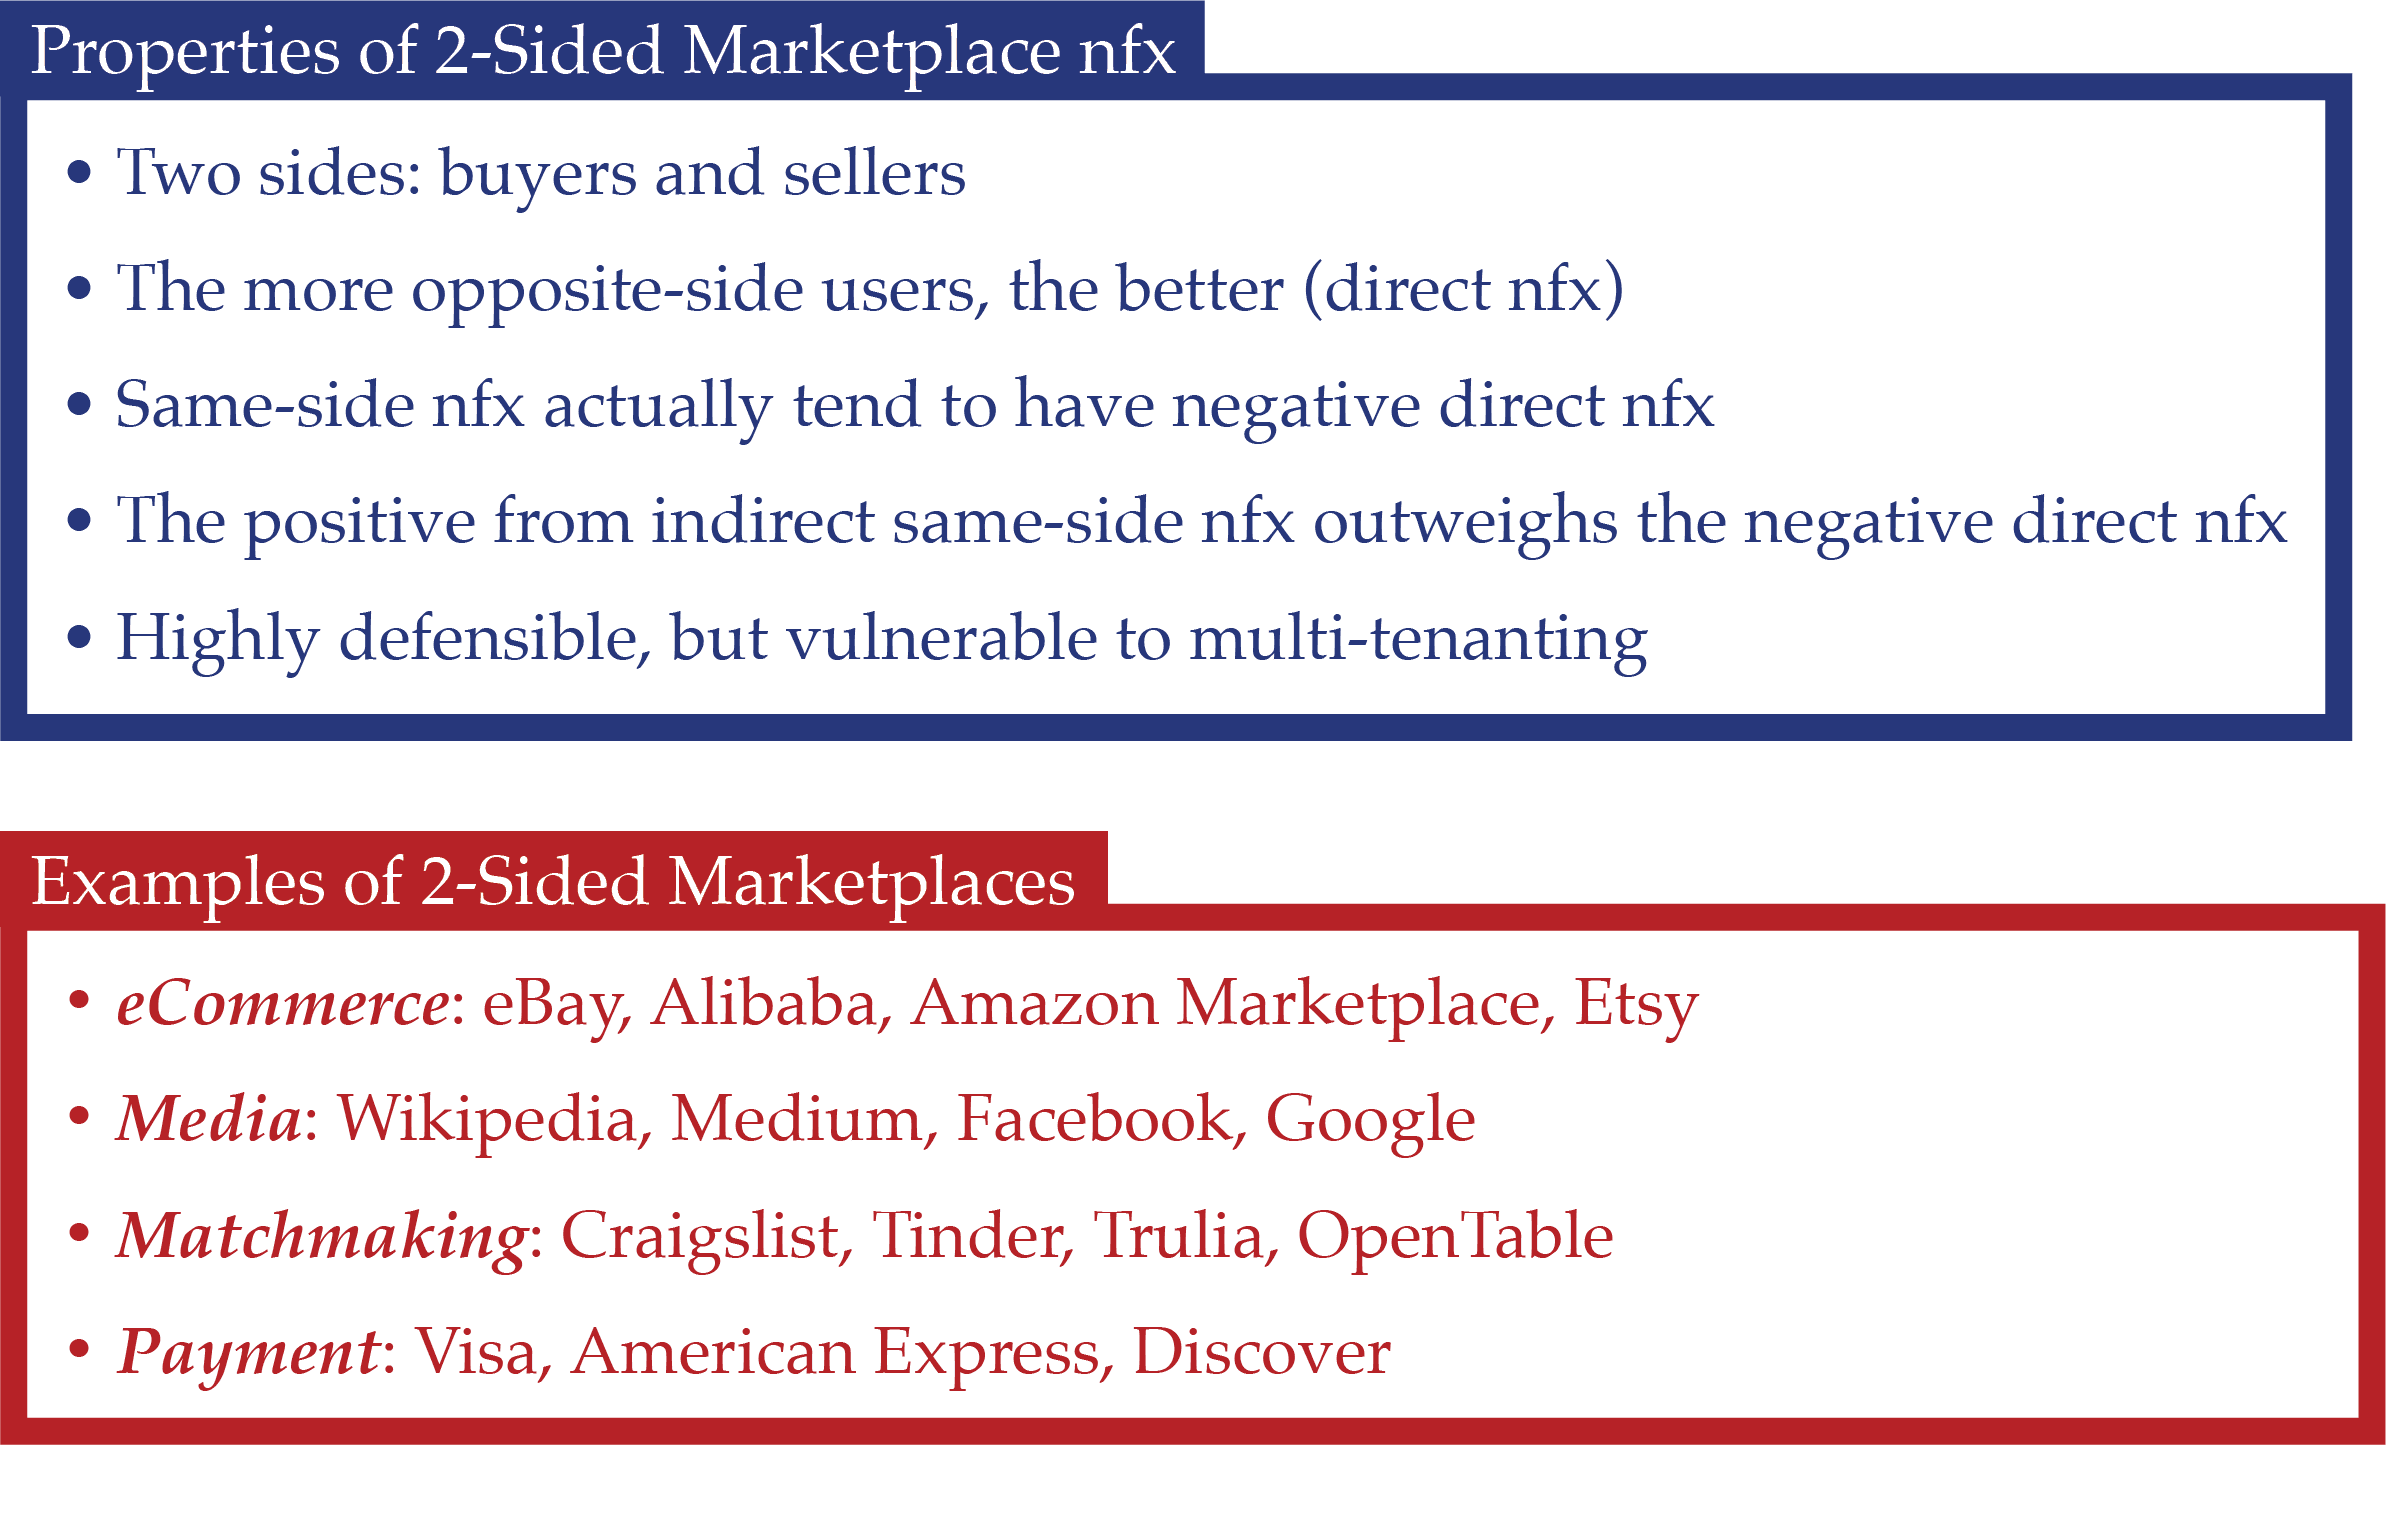 Properties & examples of 2-sided Marketplaces